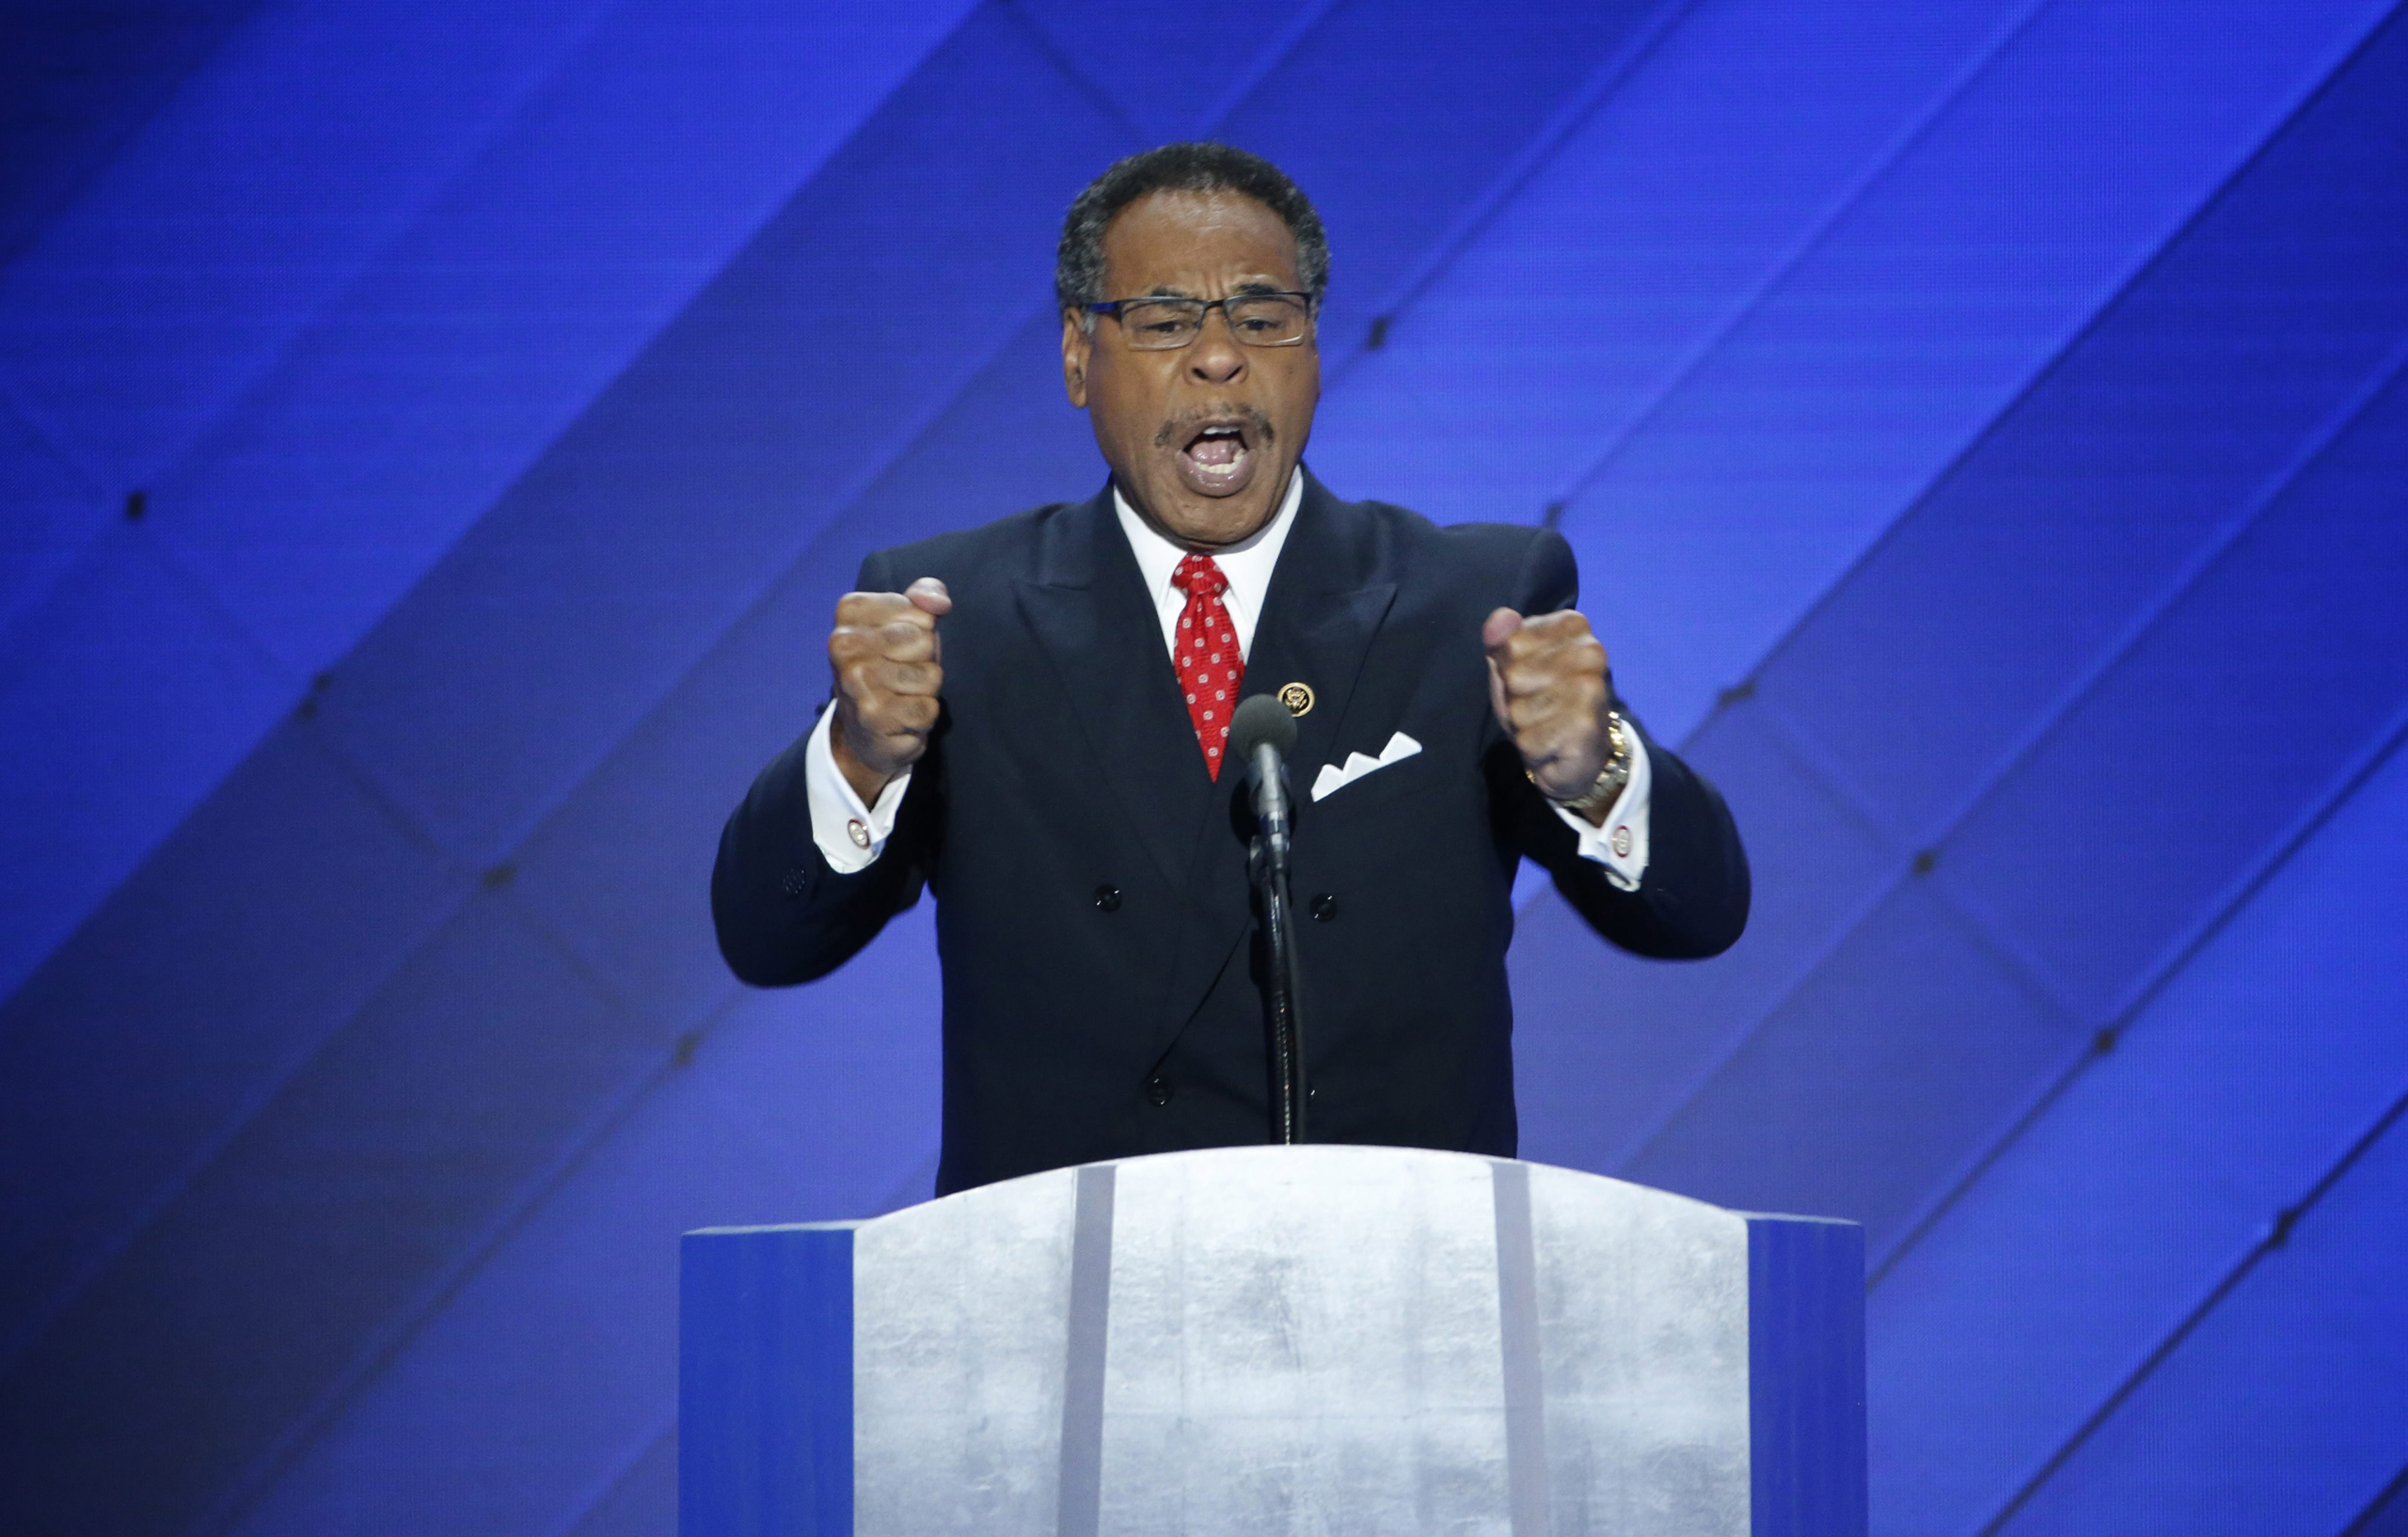 Representative from Missouri Emanuel Cleaver delivers remarks in the Wells Fargo Center on the final day of the 2016 Democratic National Convention in Philadelphia on  July 28, 2016. (Shawn Thew—EPA)